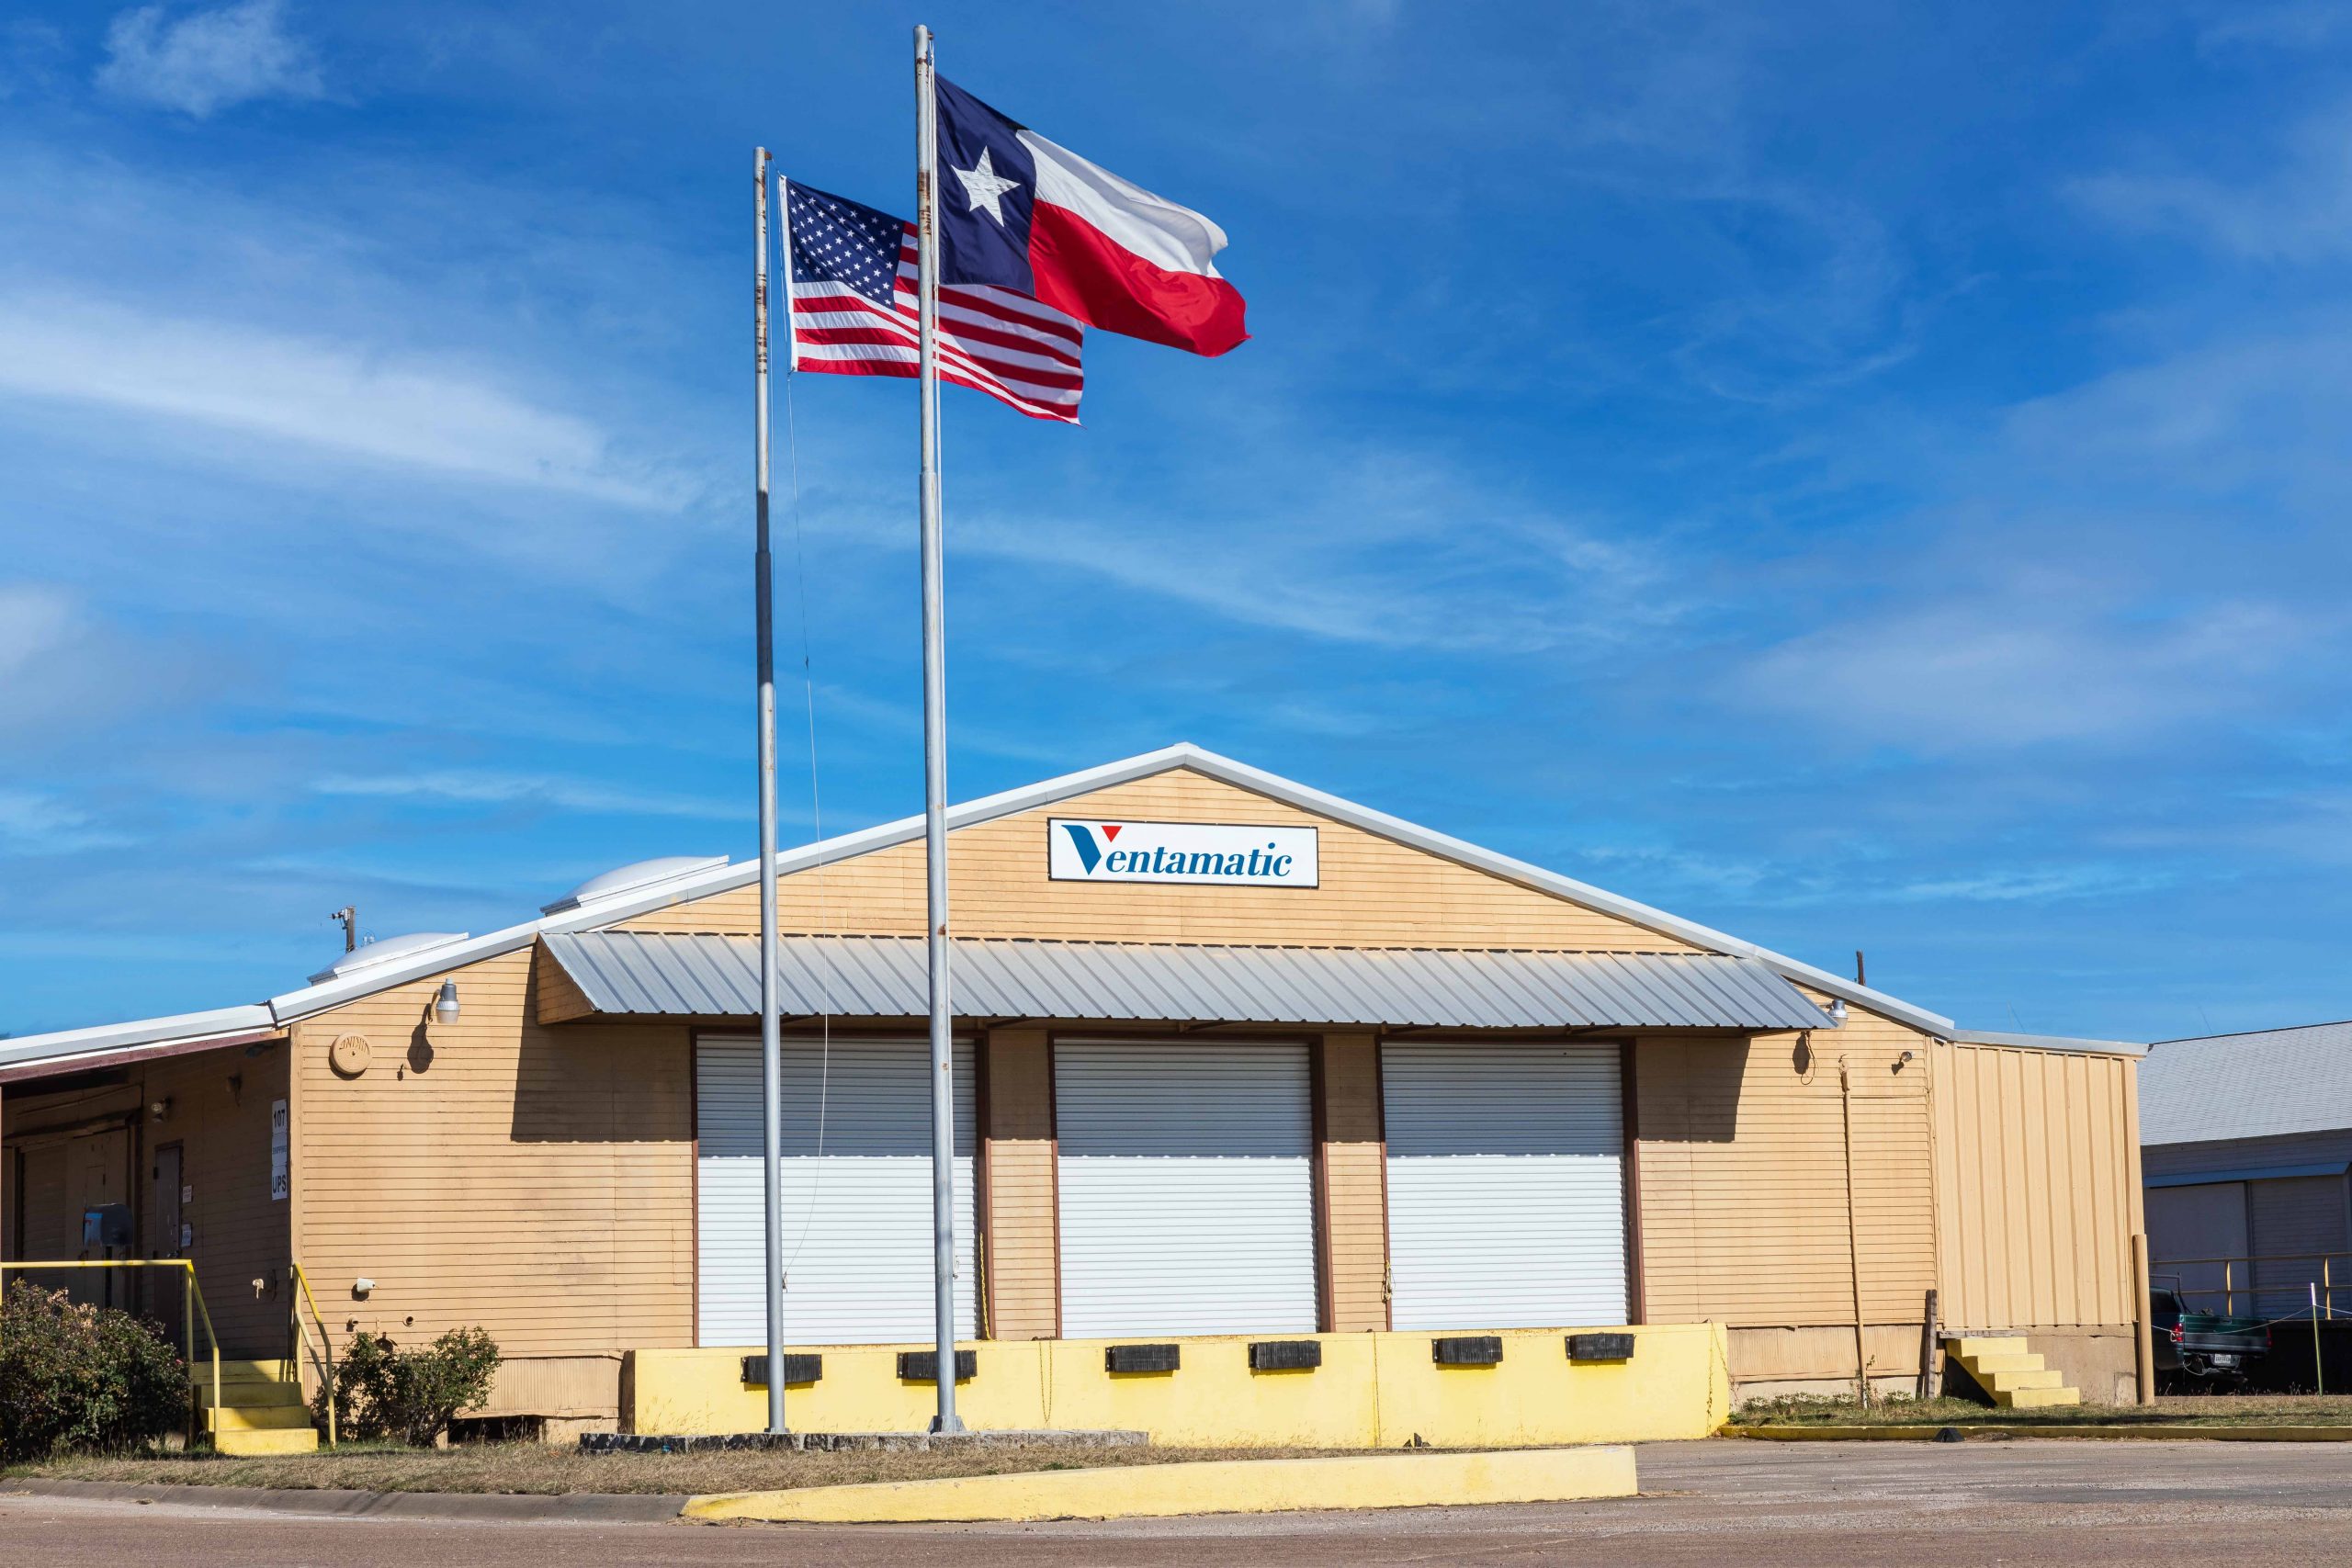 Ventamatic's shipping warehouse with US and Texas flags flying outside.